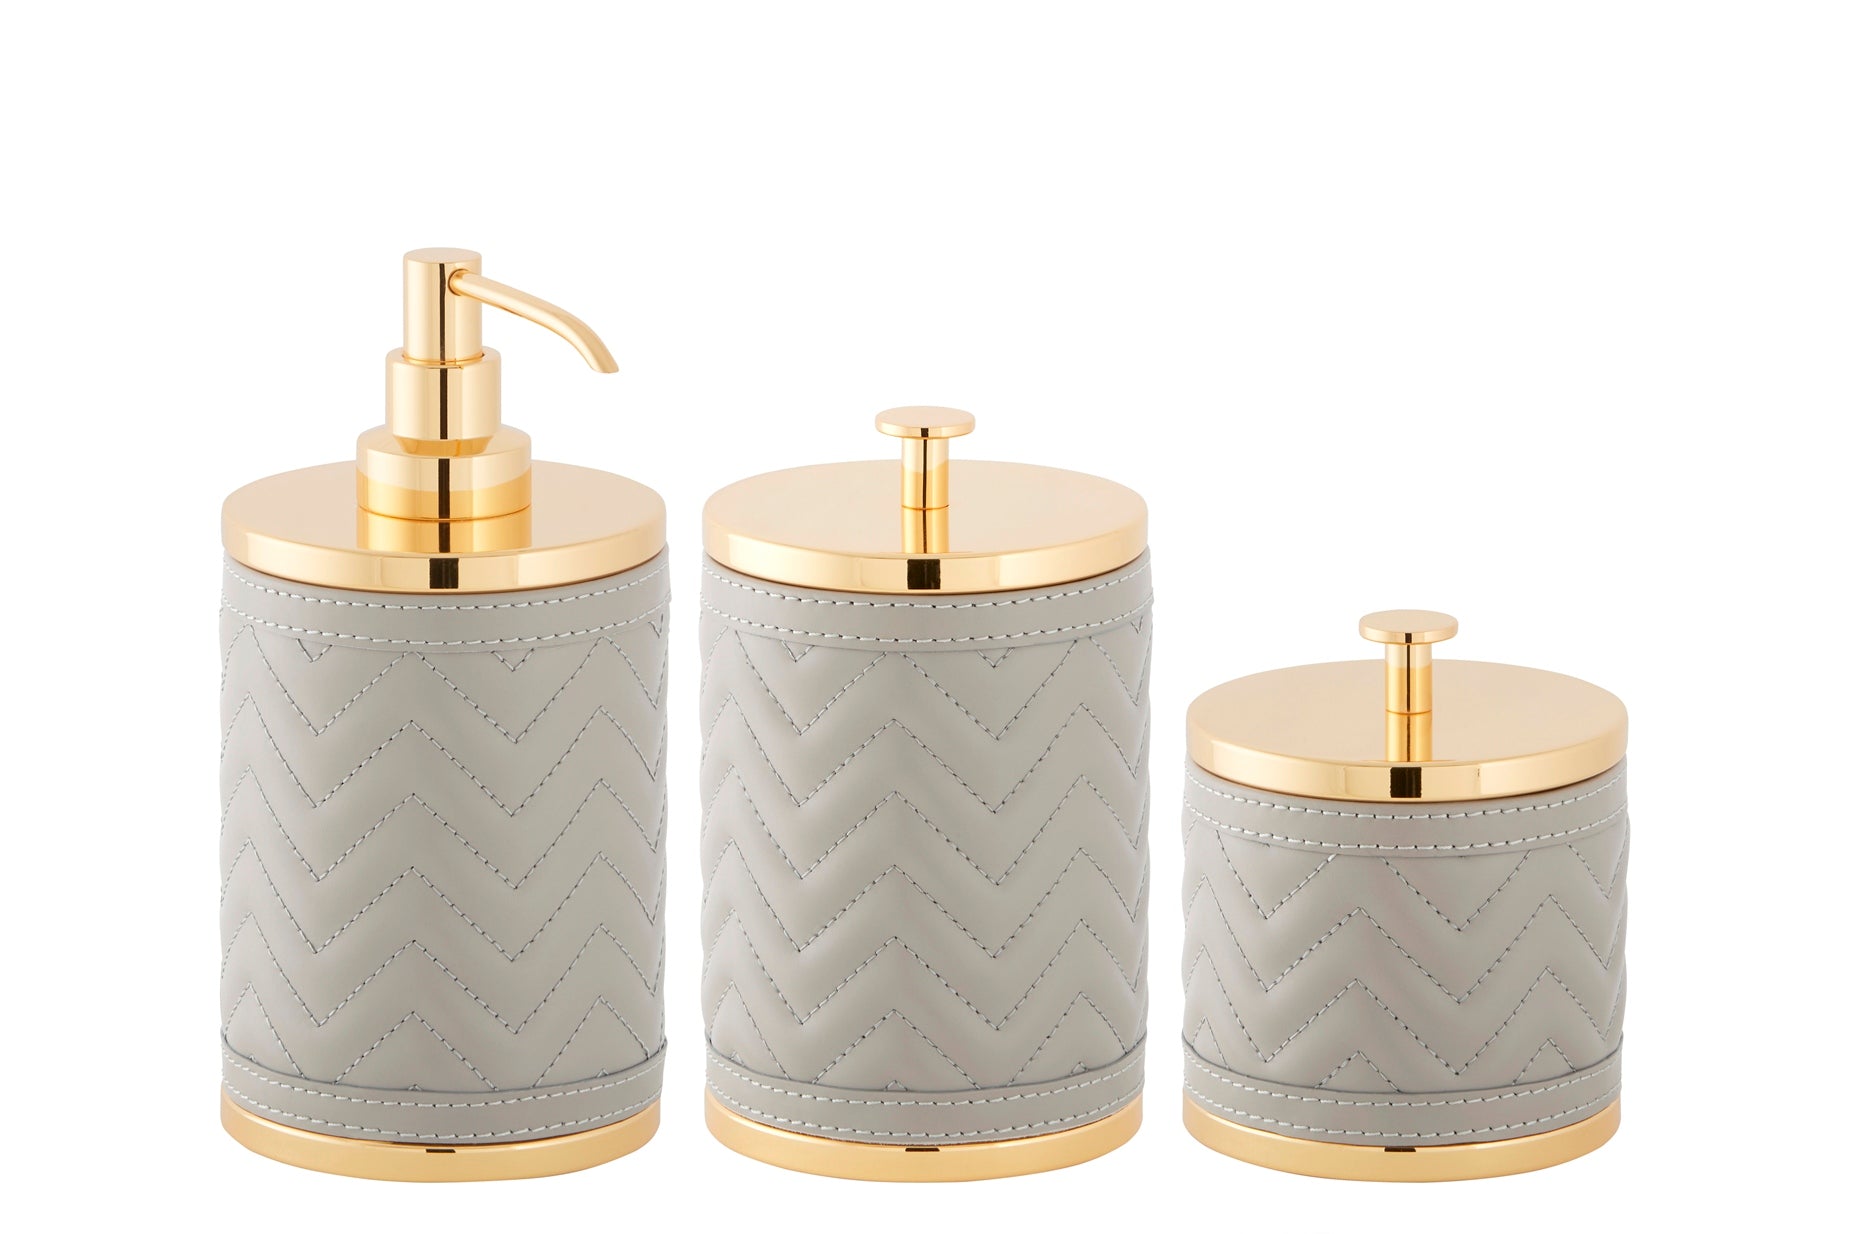 Riviere Alghero Quilted Herringbone Box | Covered with Quilted Herringbone Padded Leather | Features Chrome or Gold Metal Finish | Adds Elegance to Bathrooms